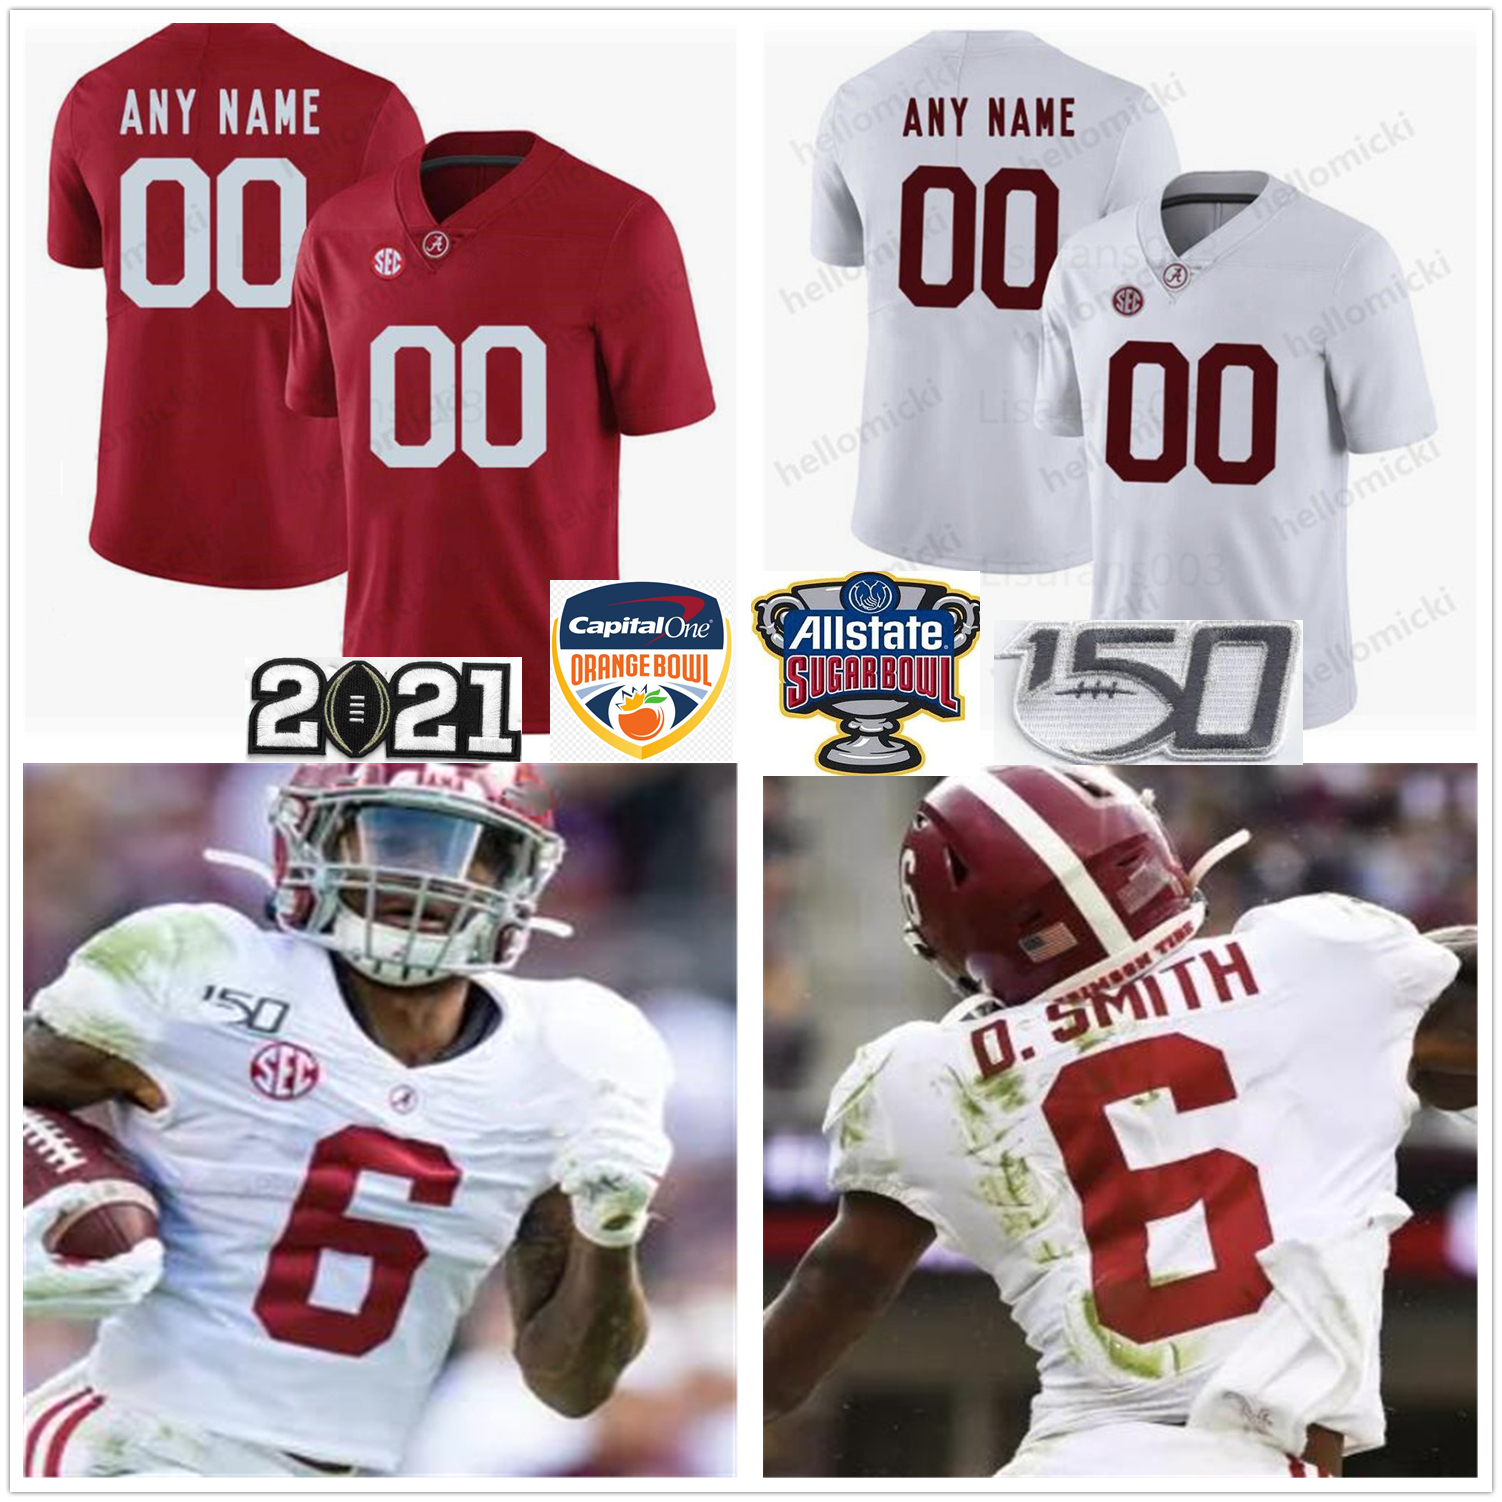 

Cotton Bowl Alabama Football Jersey Bryce Young Sanders Brian Robinson Jr. Will Anderson McKinstry N. Harris Smith Waddle M. Jones Metchie III Latu Earle To'oTo'o Battle, White with sugar patch